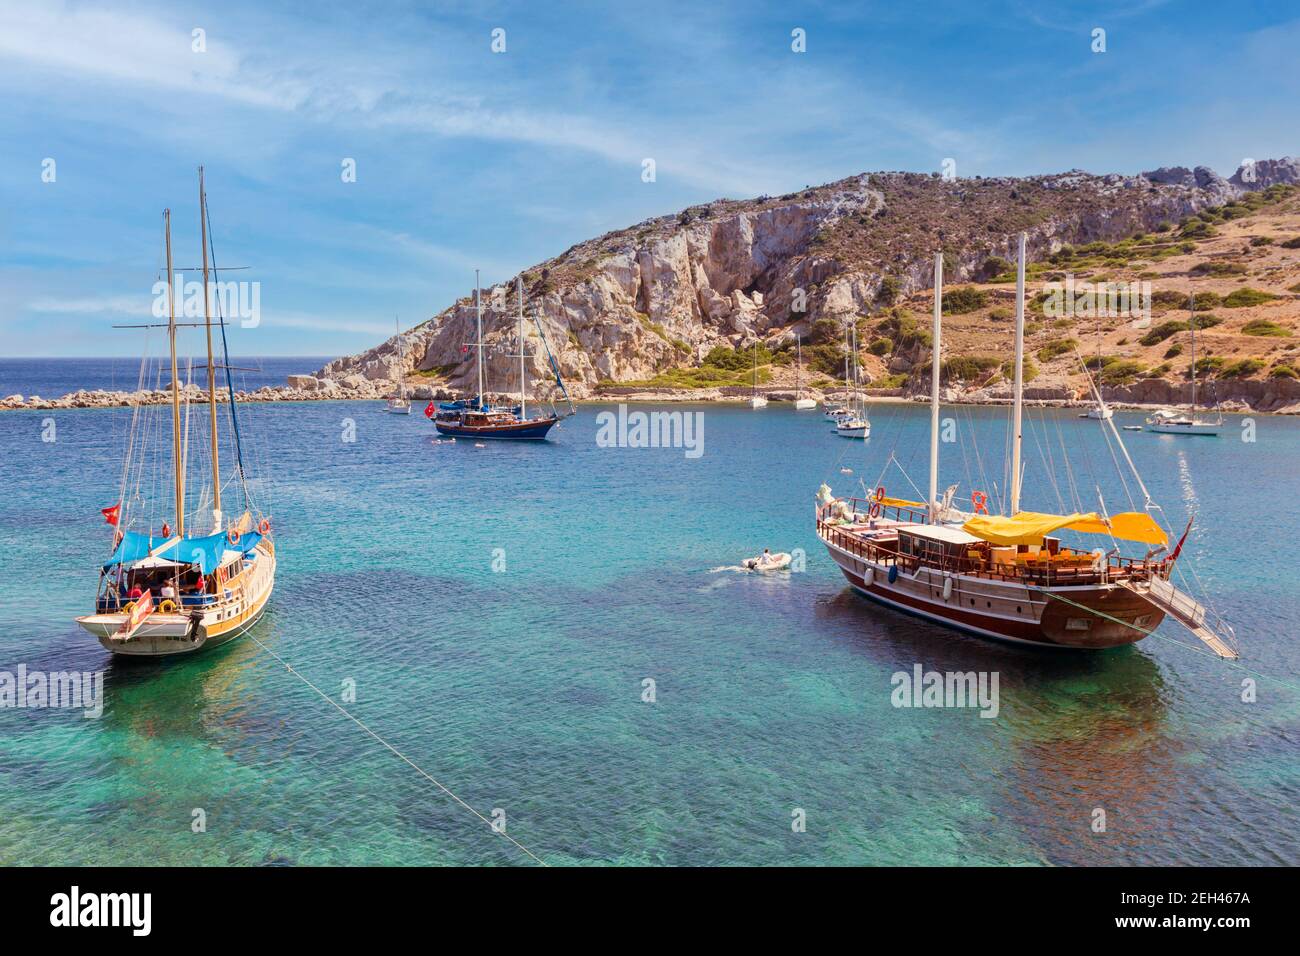 Kindos, Datca Peninsula, Mugla Province, Aegean Region,Turkey.  Yachts moored in bay in front of town. Stock Photo